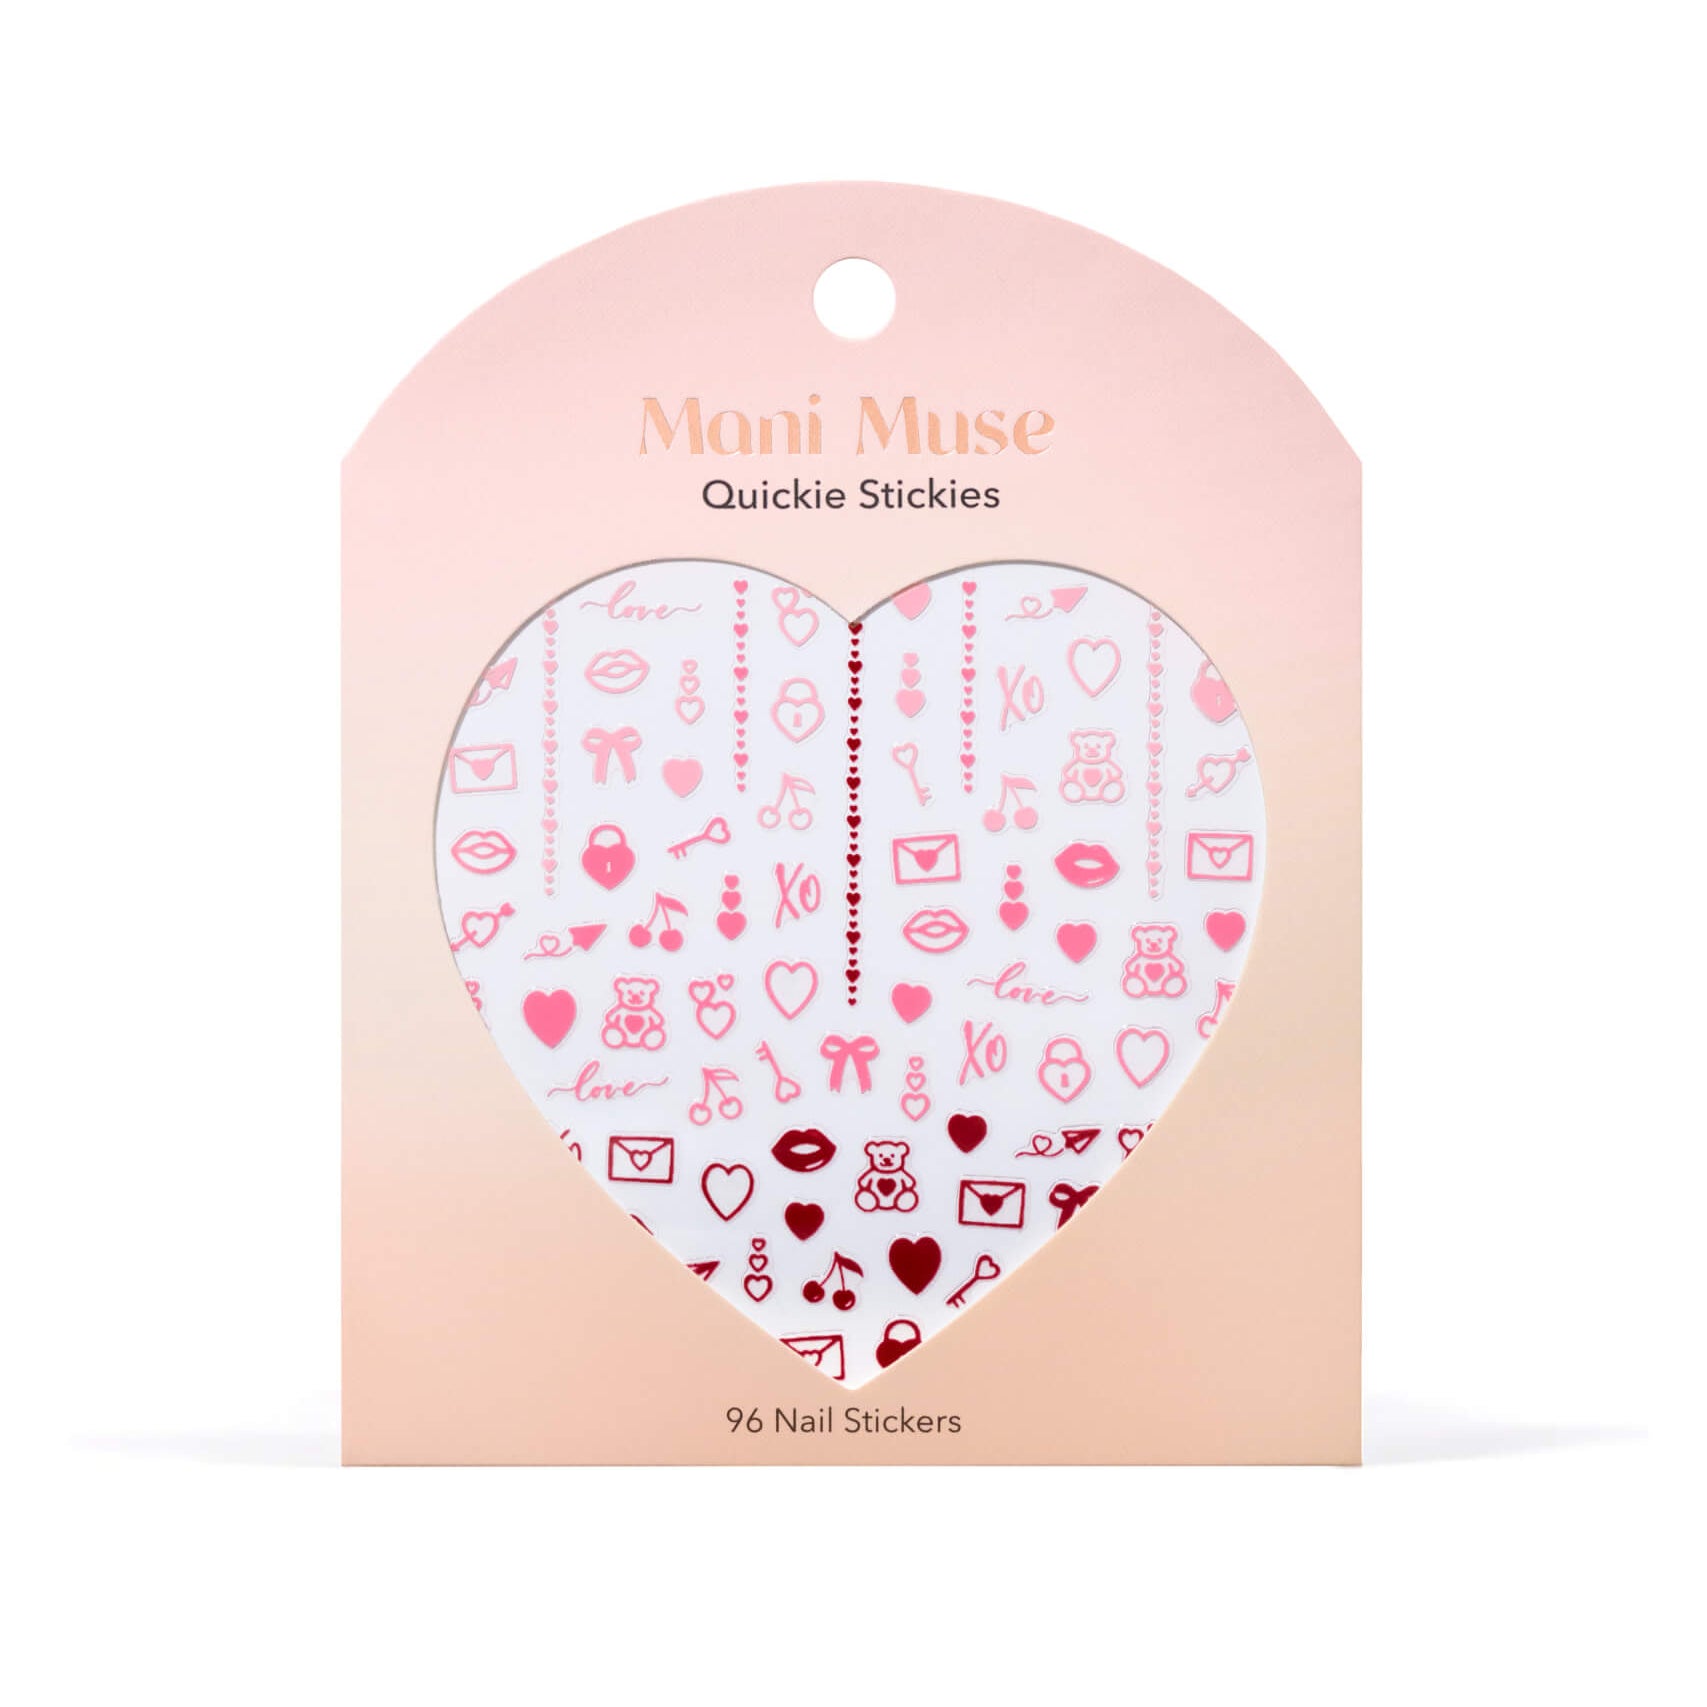 Smitten Mittens Nail Stickers E-Commerce Image